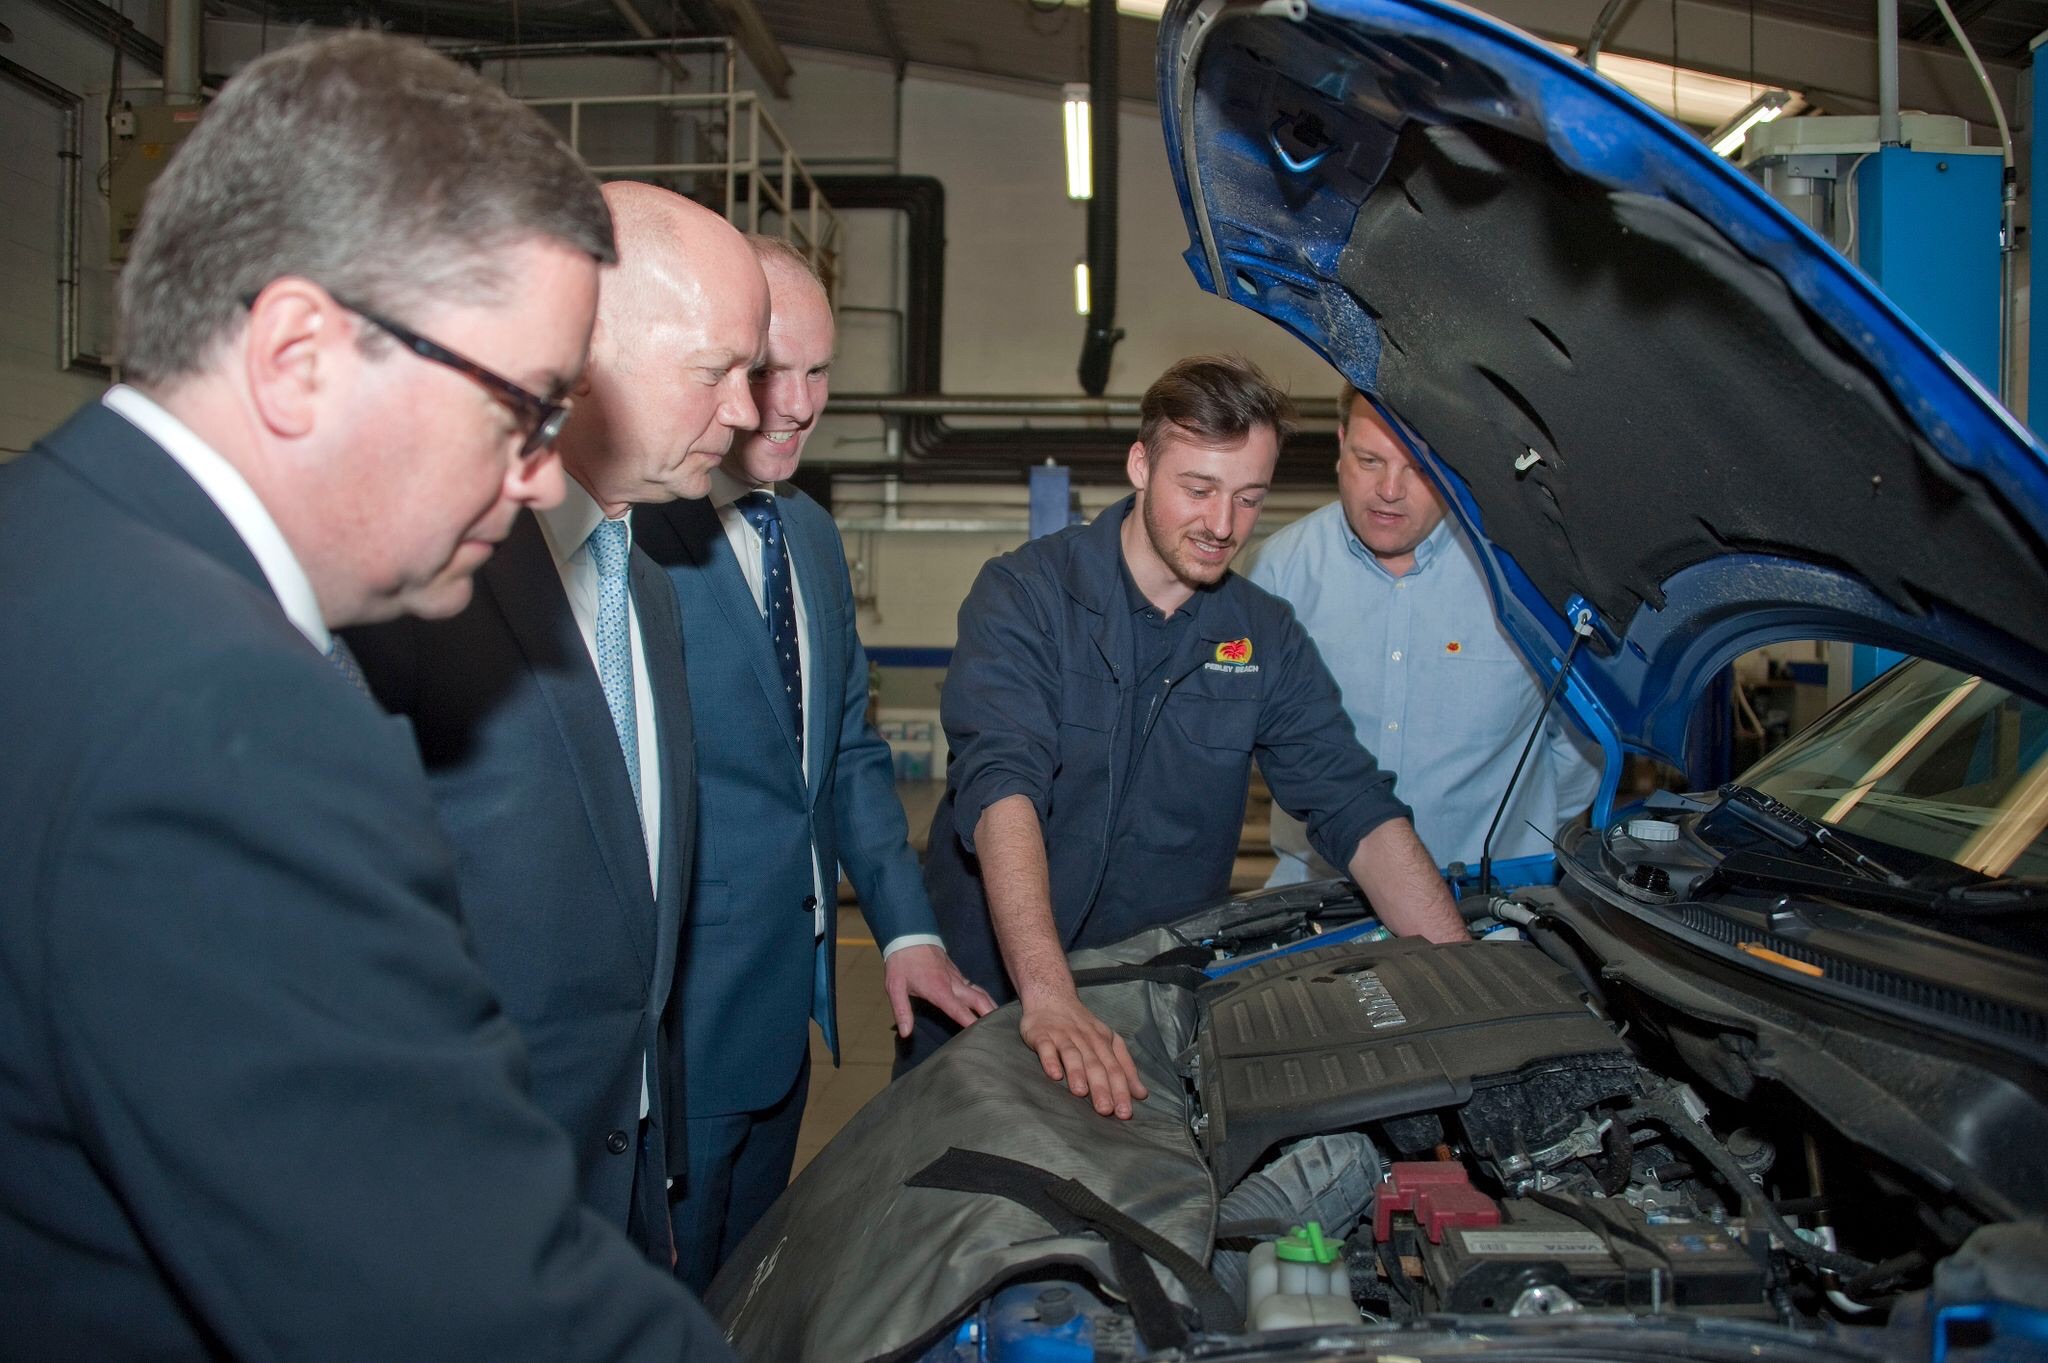 Top Tory promises apprenticeship drive during visit to car dealership